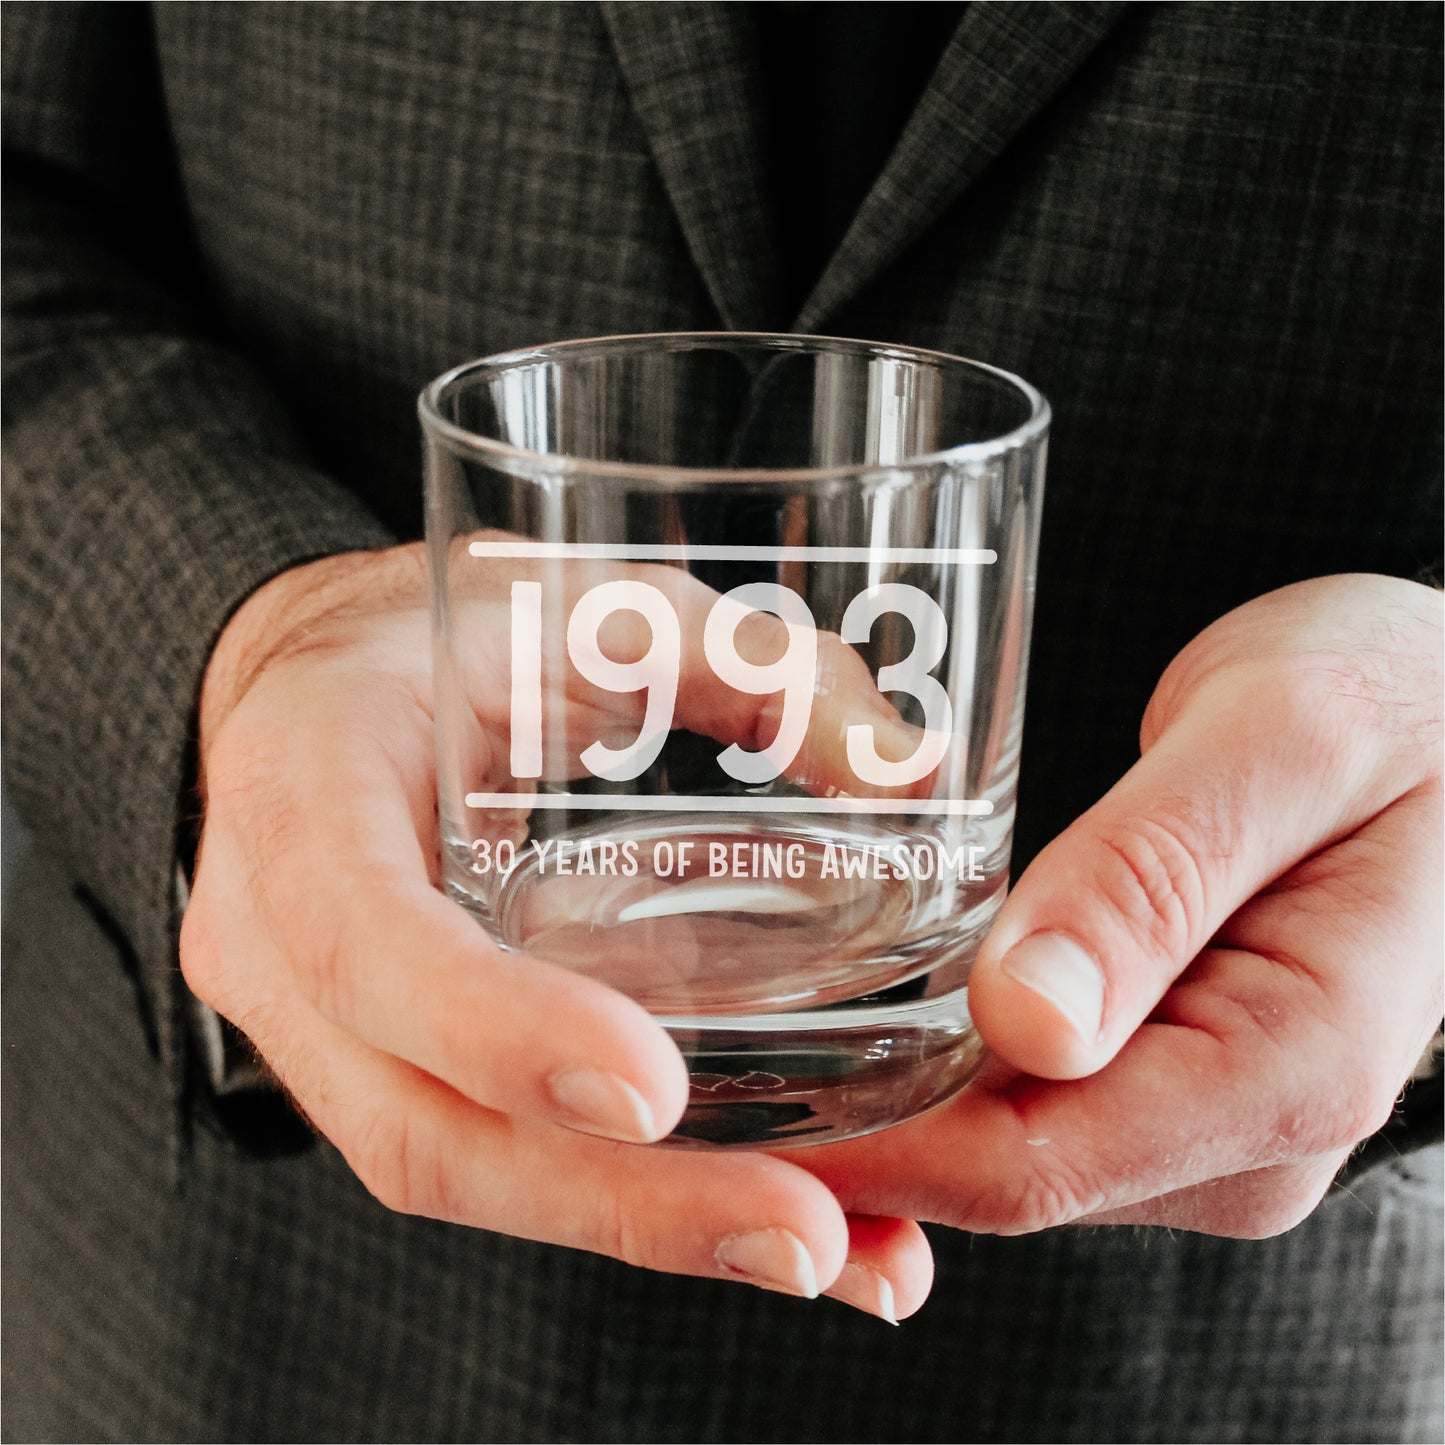 man holding personalised whisky glass tumbler, engraved with the year 1993 and the wording 30 years of being awesome